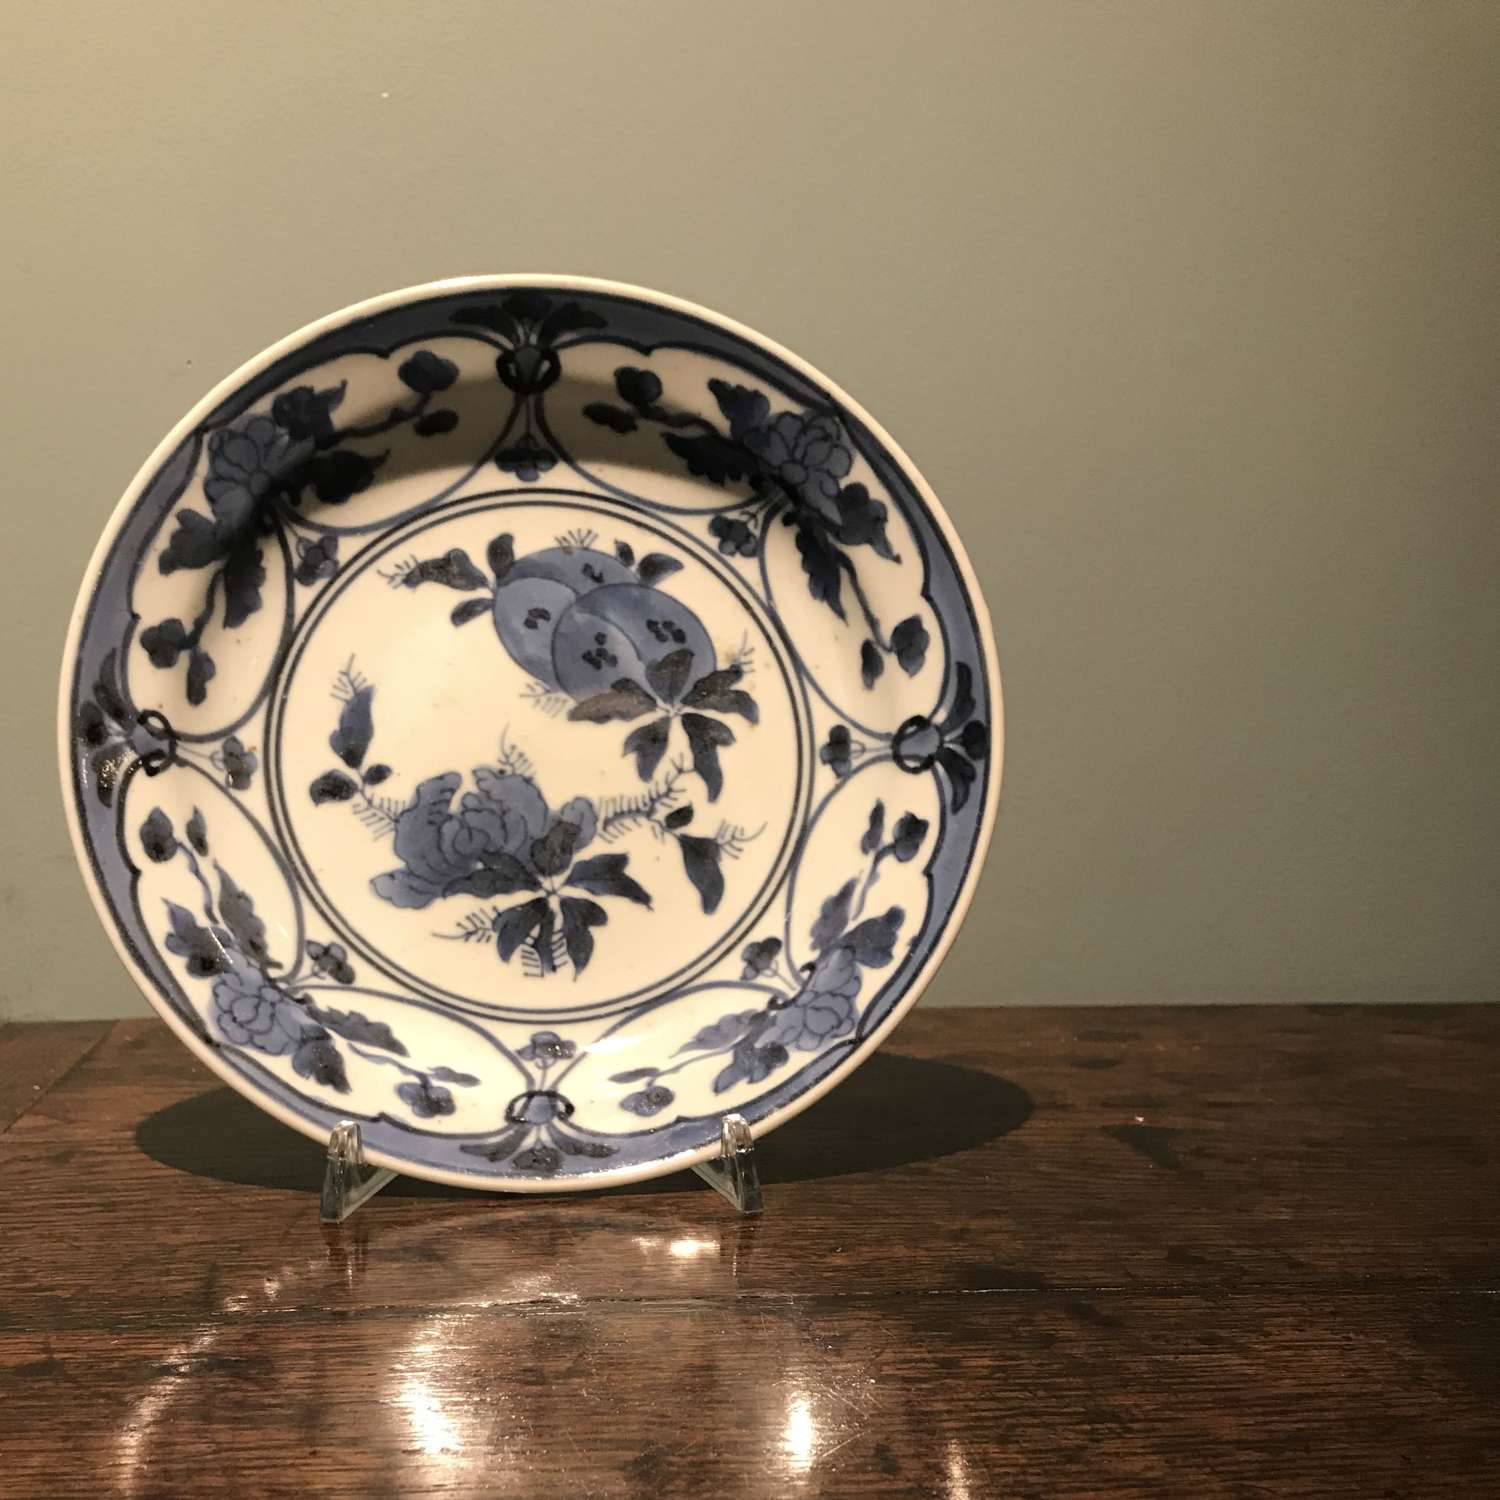 Genroku period Japanese blue and white plate c.1680